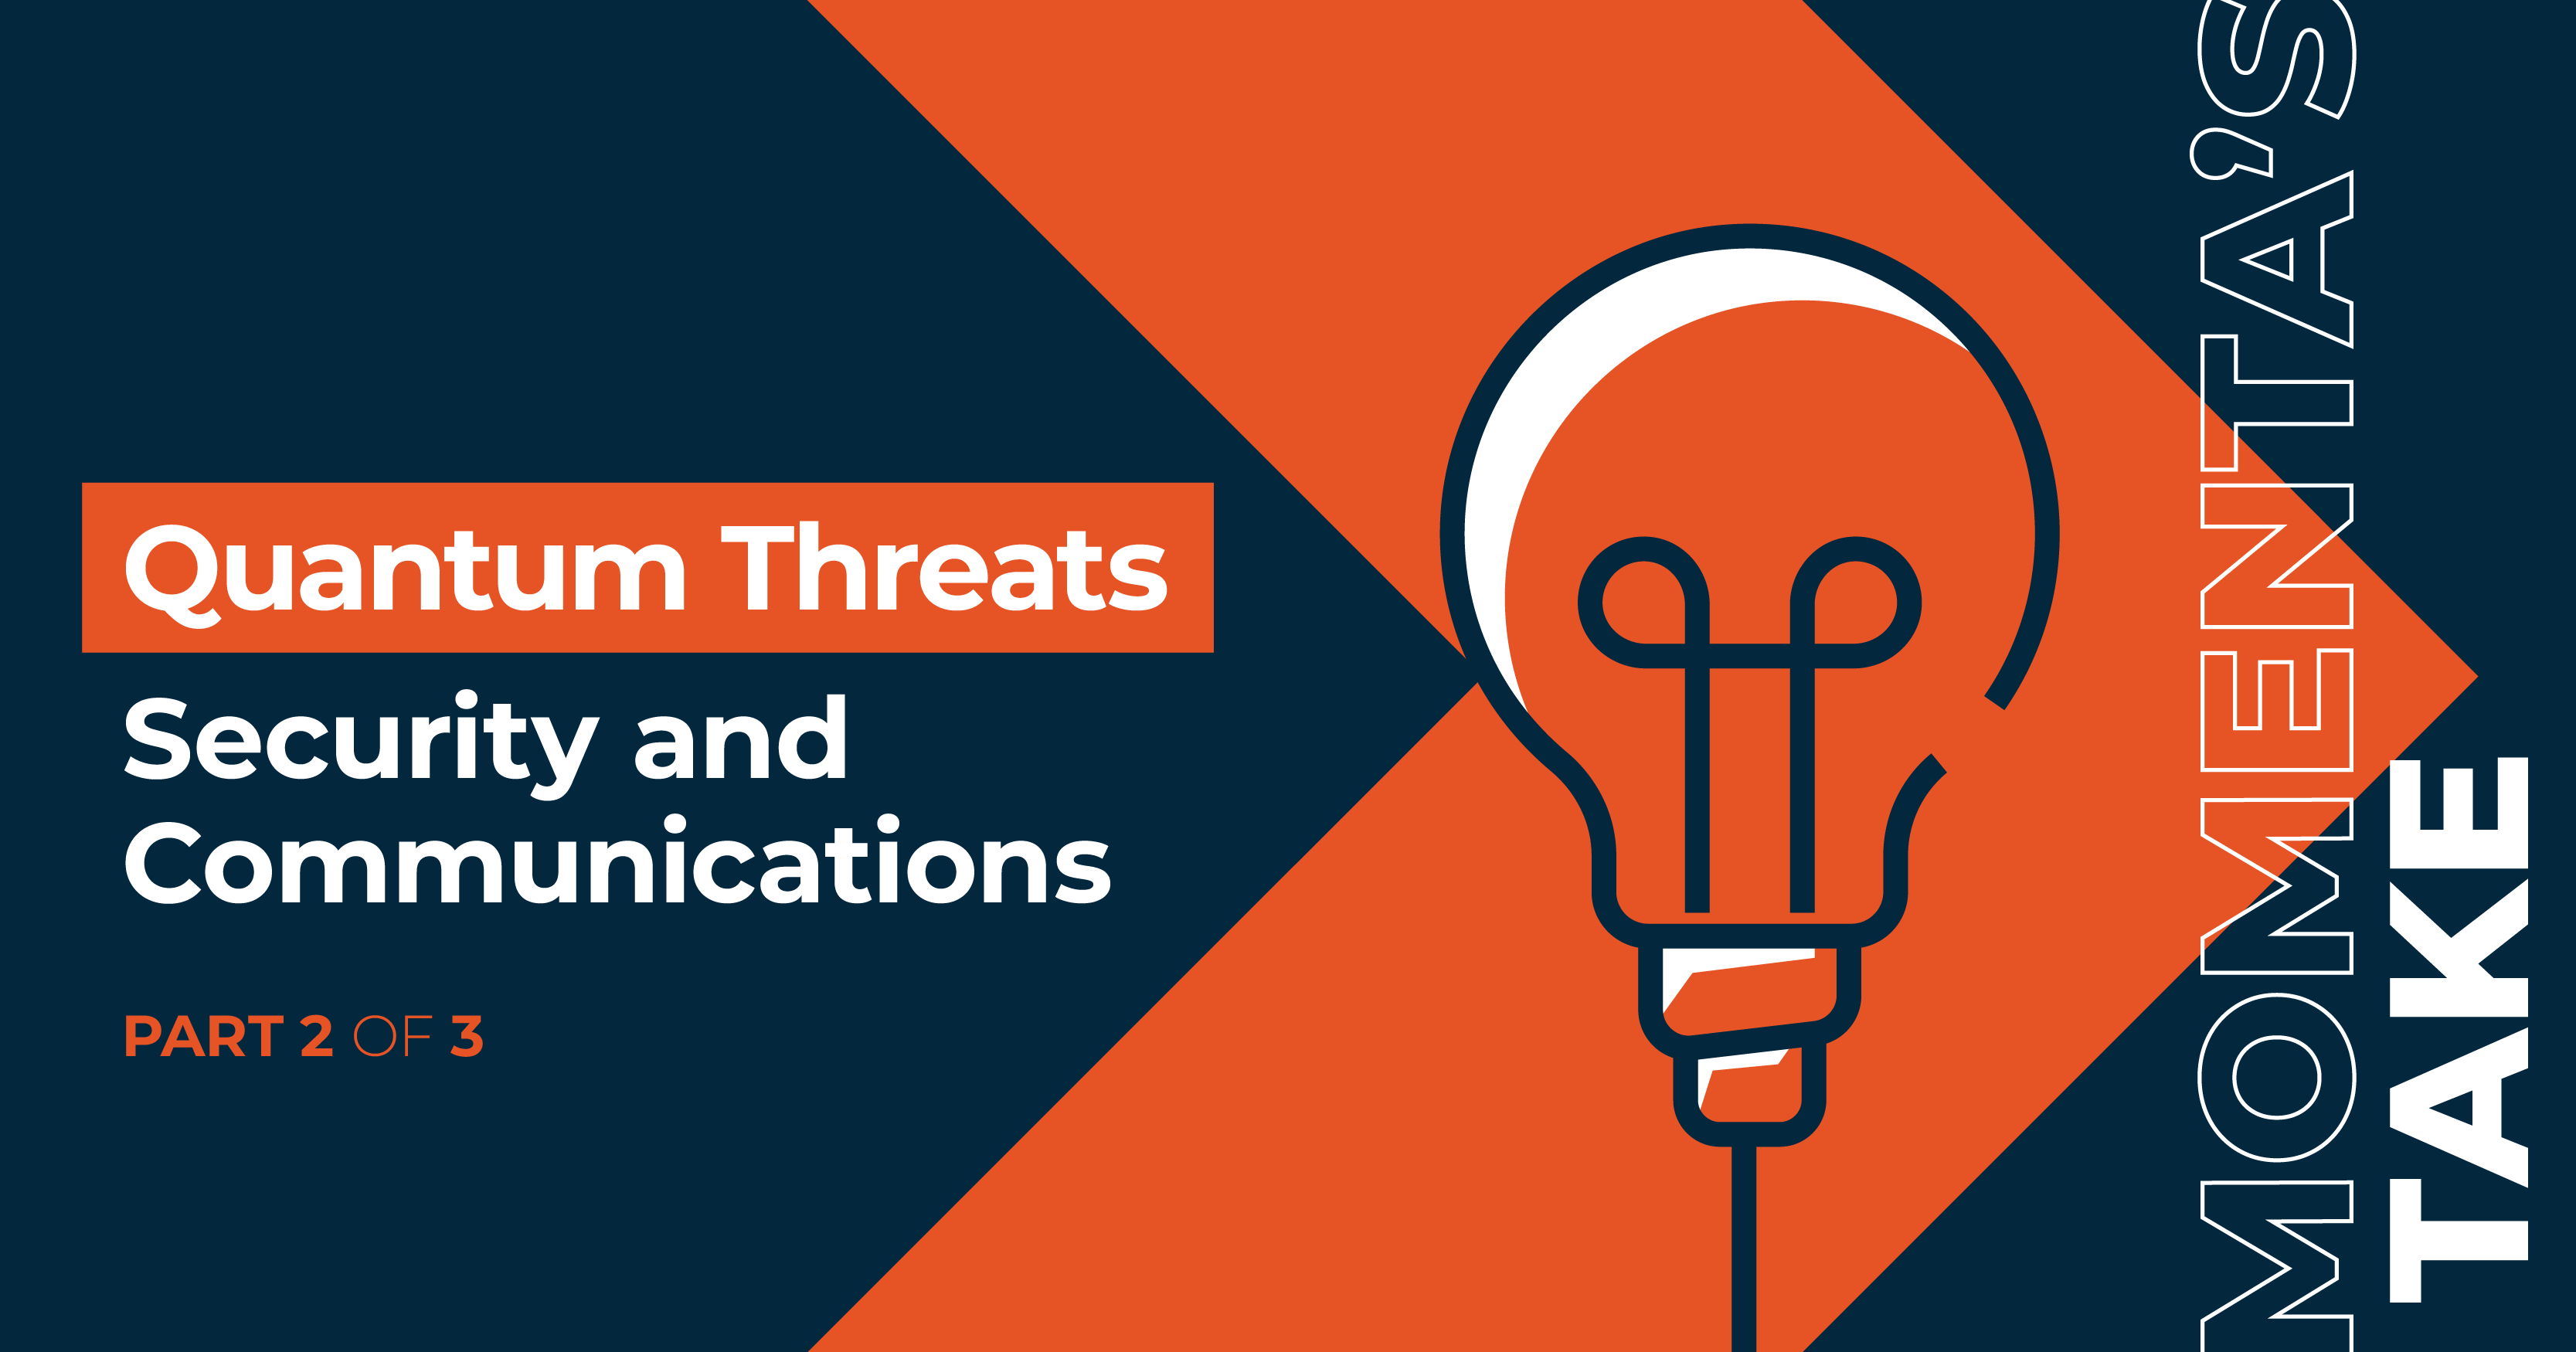 Quantum Threats: Security and Communications